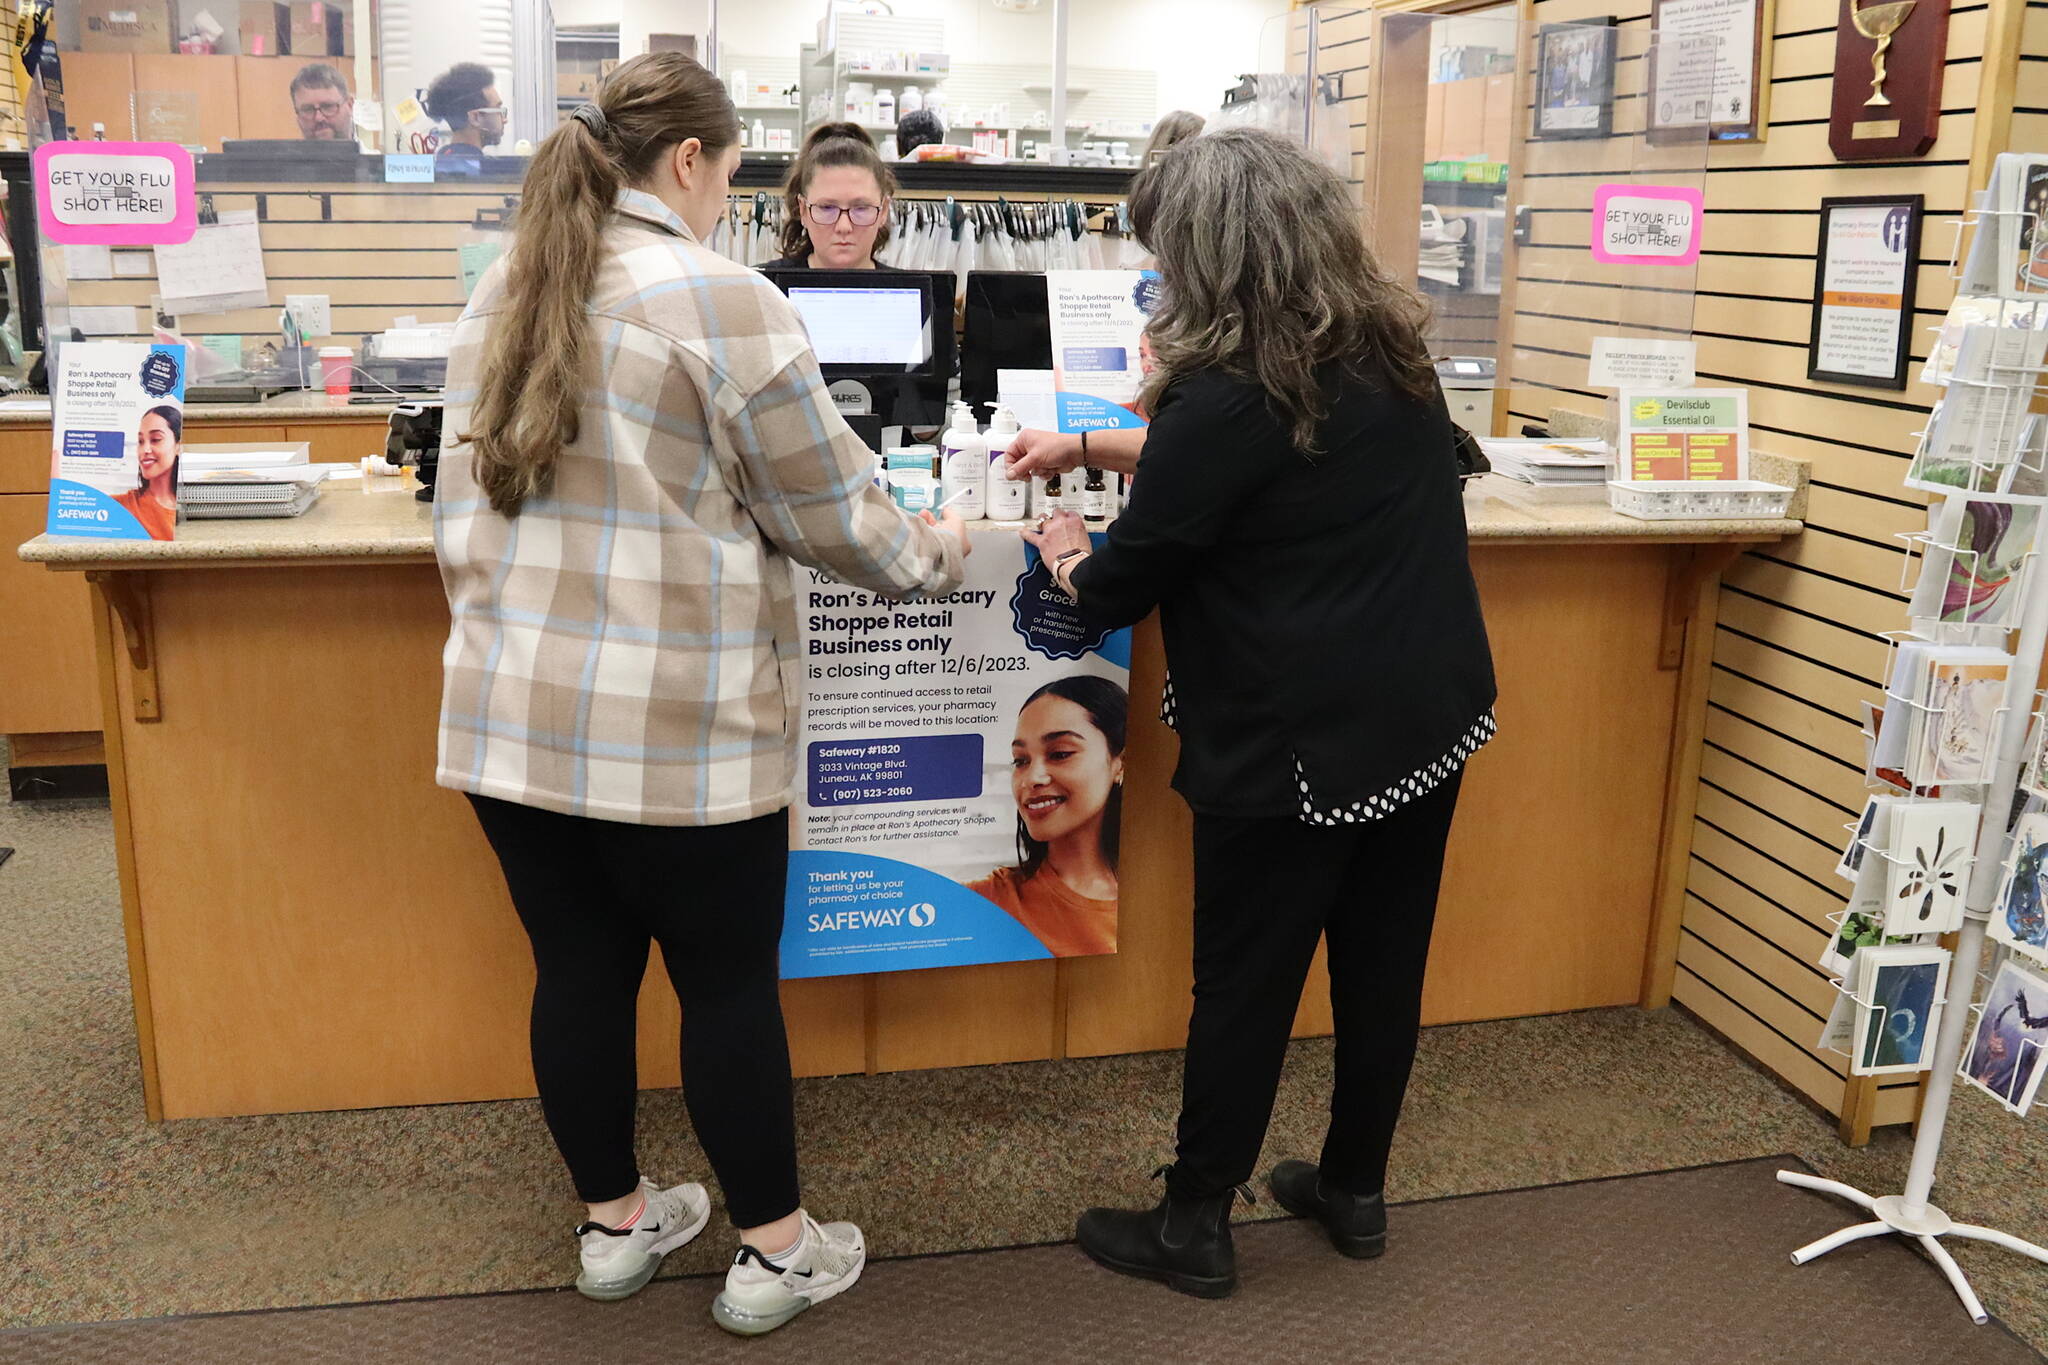 Cheyenne Latu (left), a pharmacy technician at Ron’s Apothecary Shoppe, and business co-owner Gretchen Watts hang a poster at the front counter Thursday announcing the store’s closure after Dec. 6 as Jessica Kirtley, another pharmacy technician, works at the front register. The nearby Safeway supermarket has agreed to take the prescriptions of all customers as well as hire all of the independent pharmacy’s employees, according to the co-owners who are retiring. (Mark Sabbatini / Juneau Empire)